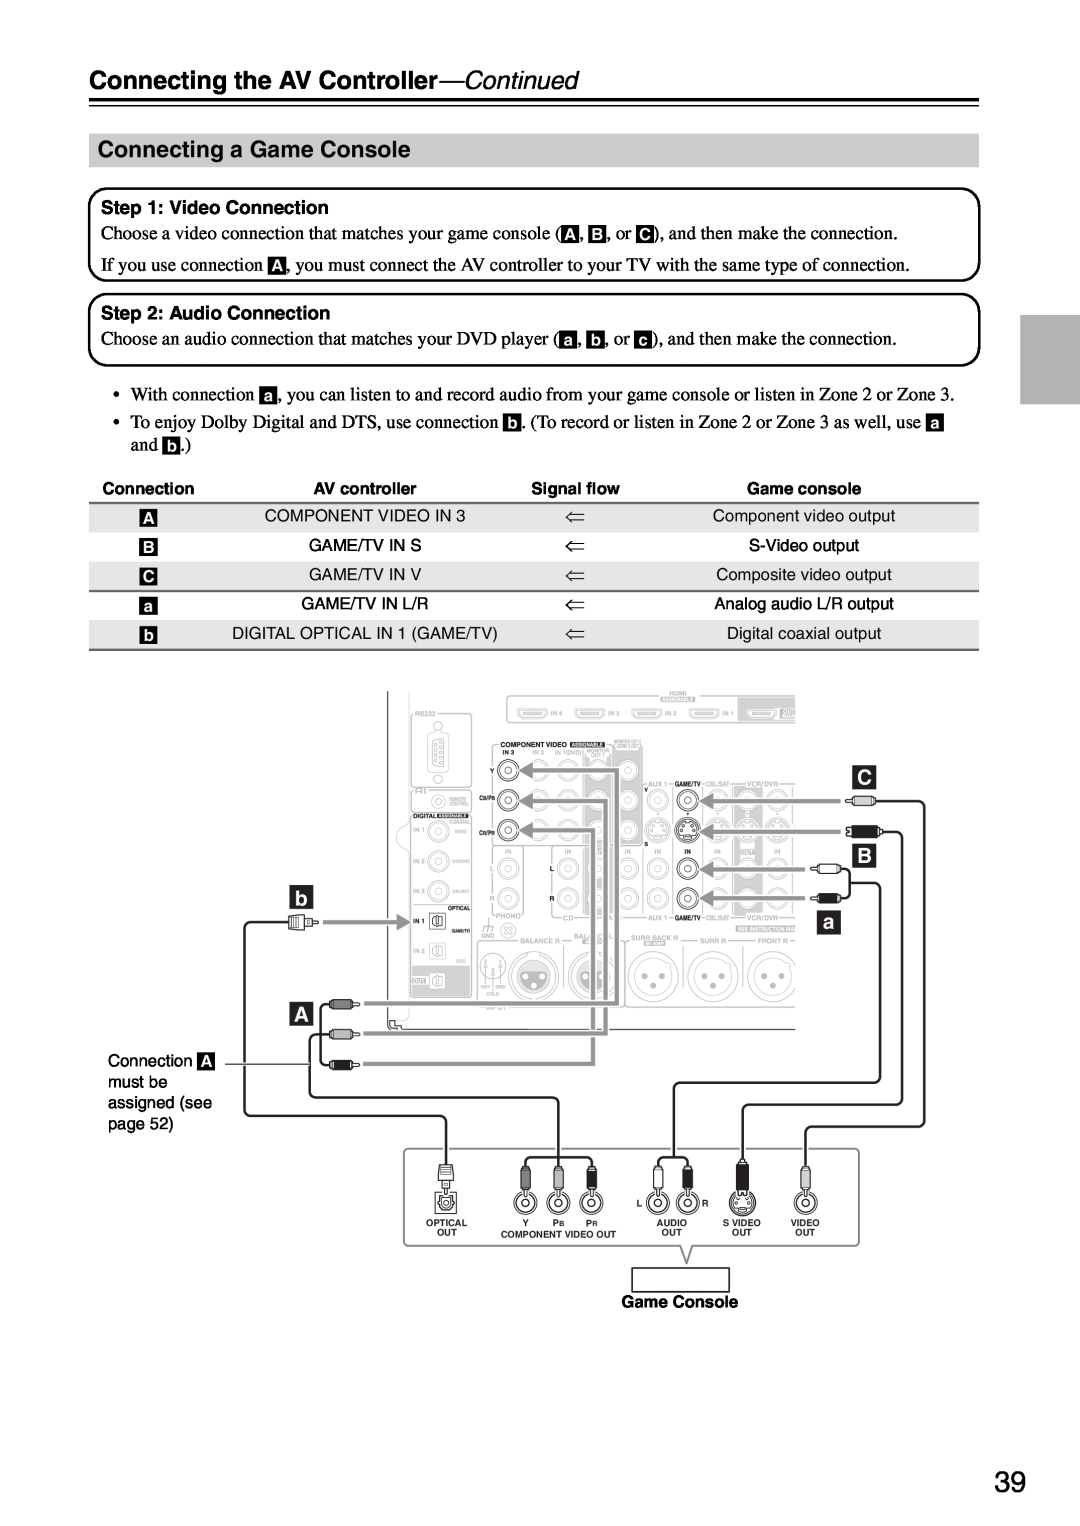 Onkyo PR-SC886 instruction manual Connecting a Game Console, Connecting the AV Controller—Continued, C B a 